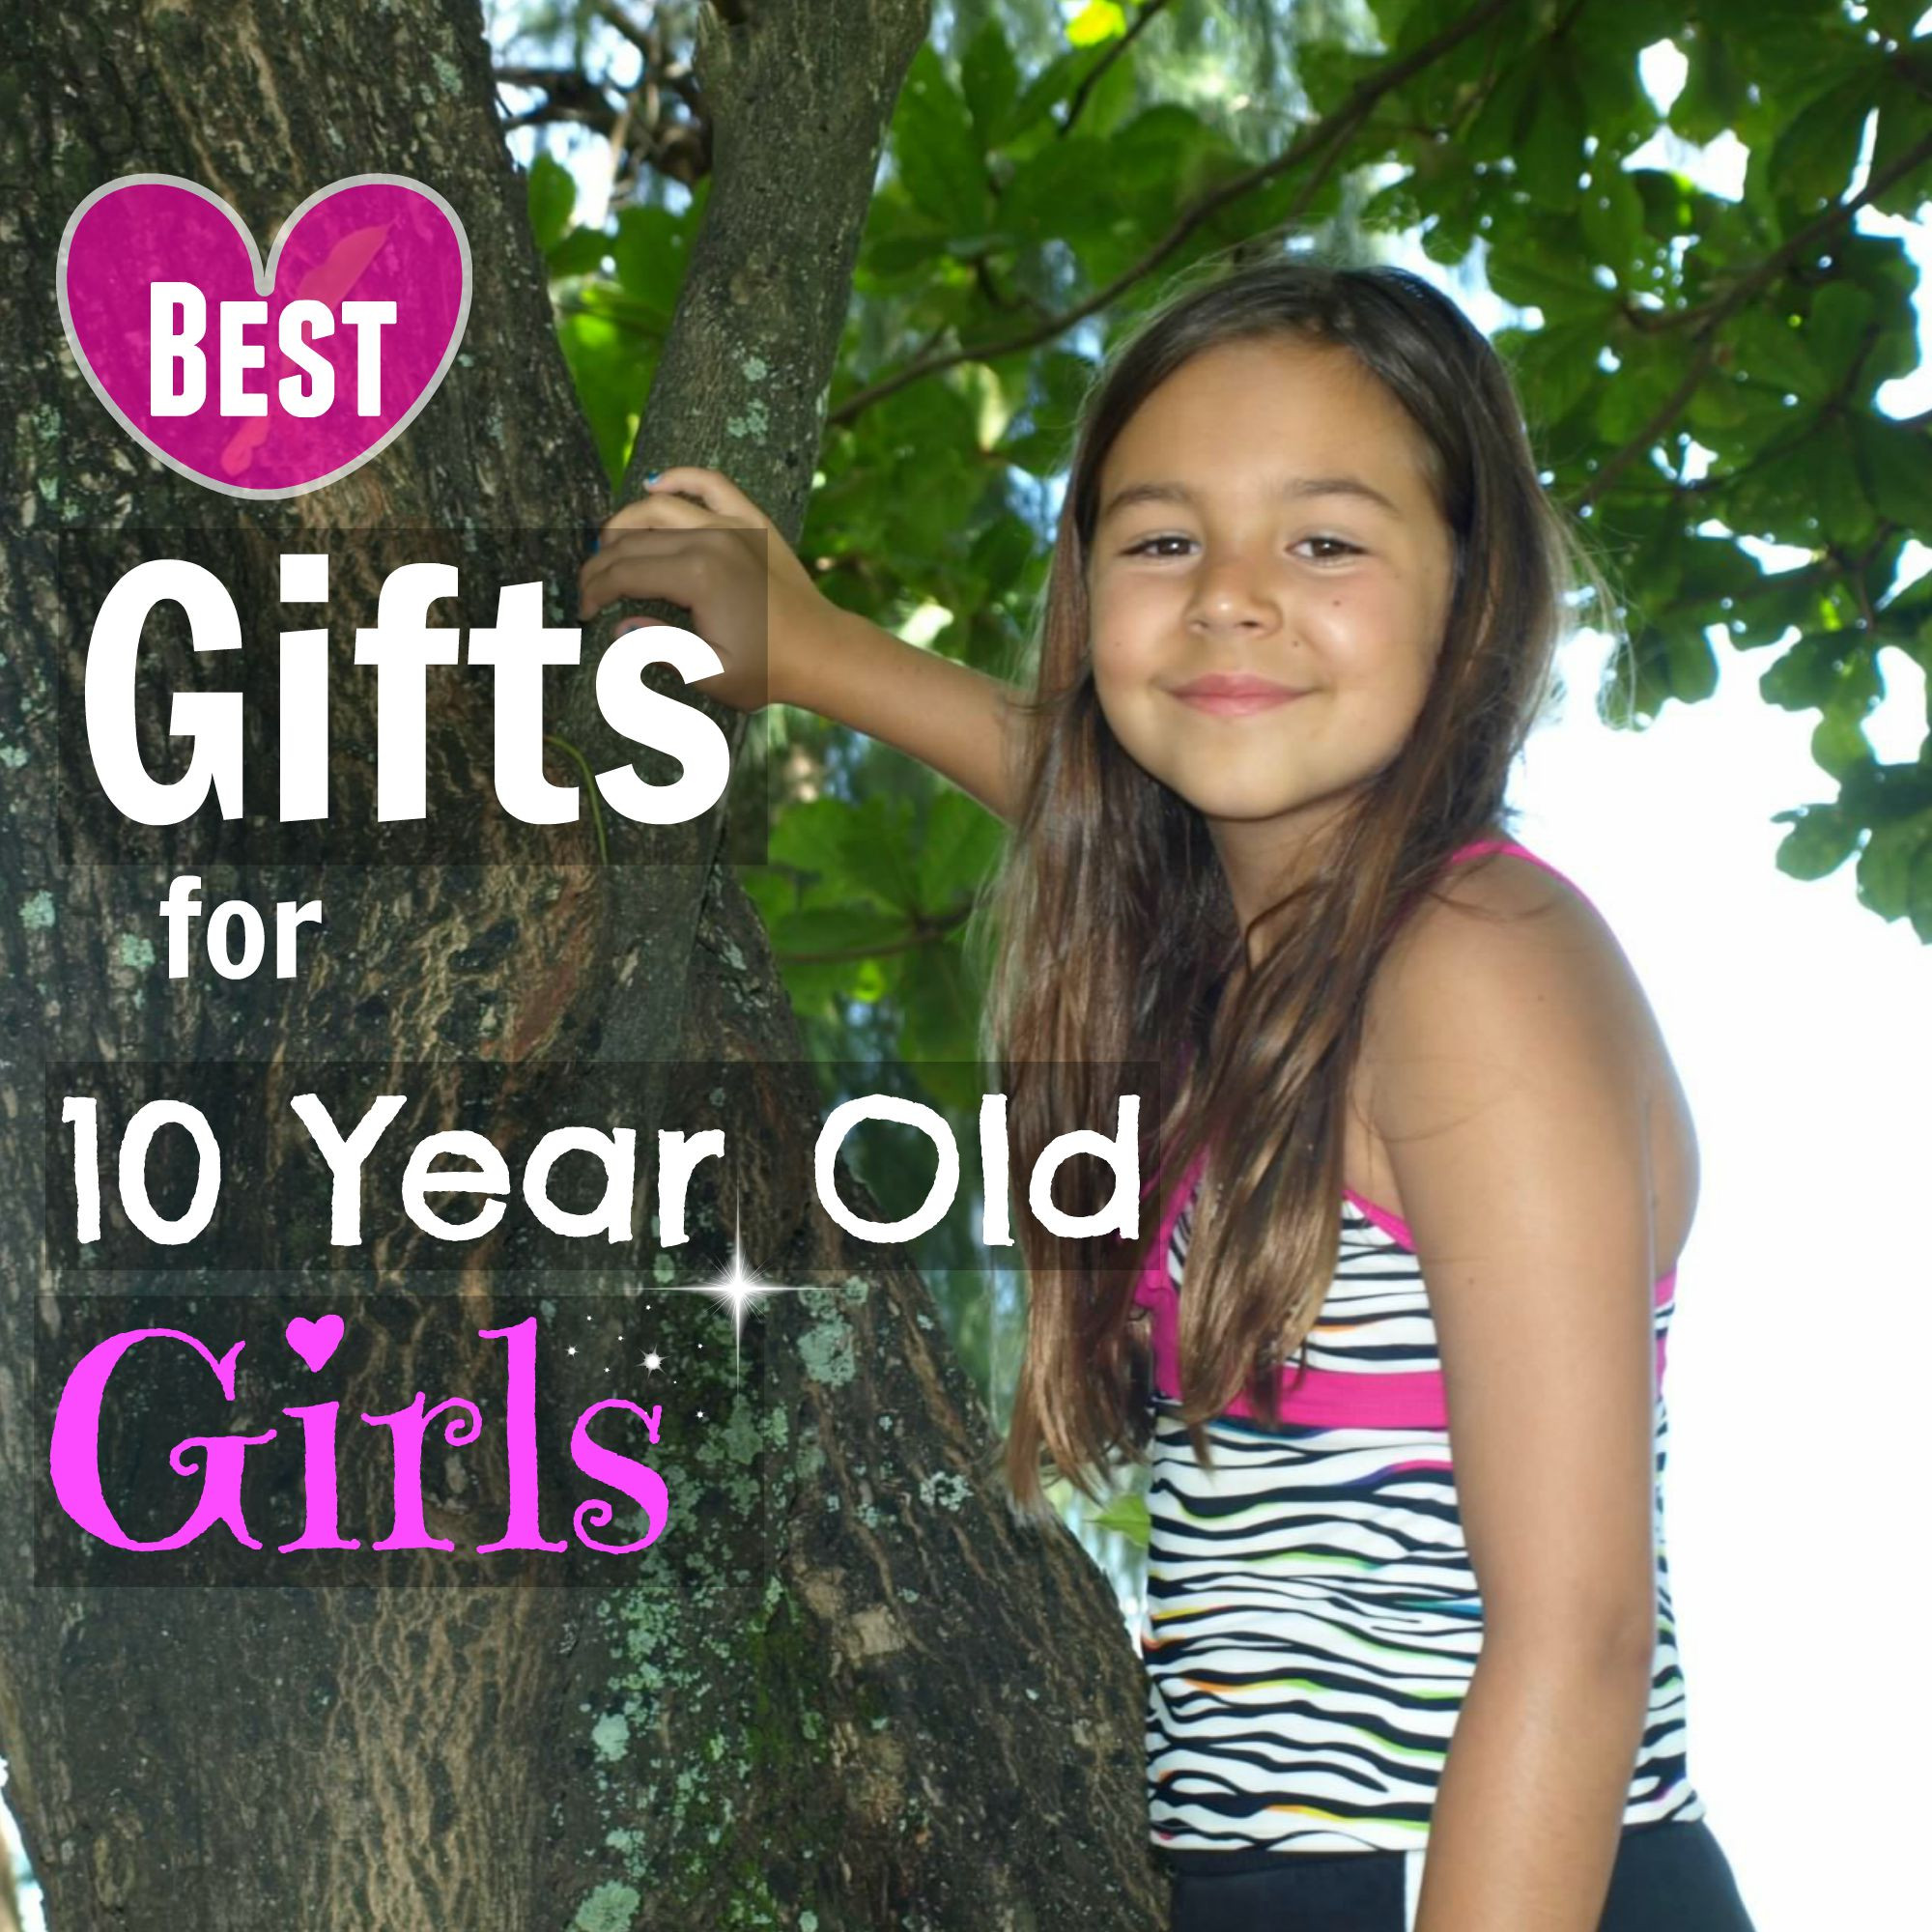 Gift Ideas For 10 Yr Old Girls
 25 Best Gifts for 10 Year Old Girls You Wouldn t Have